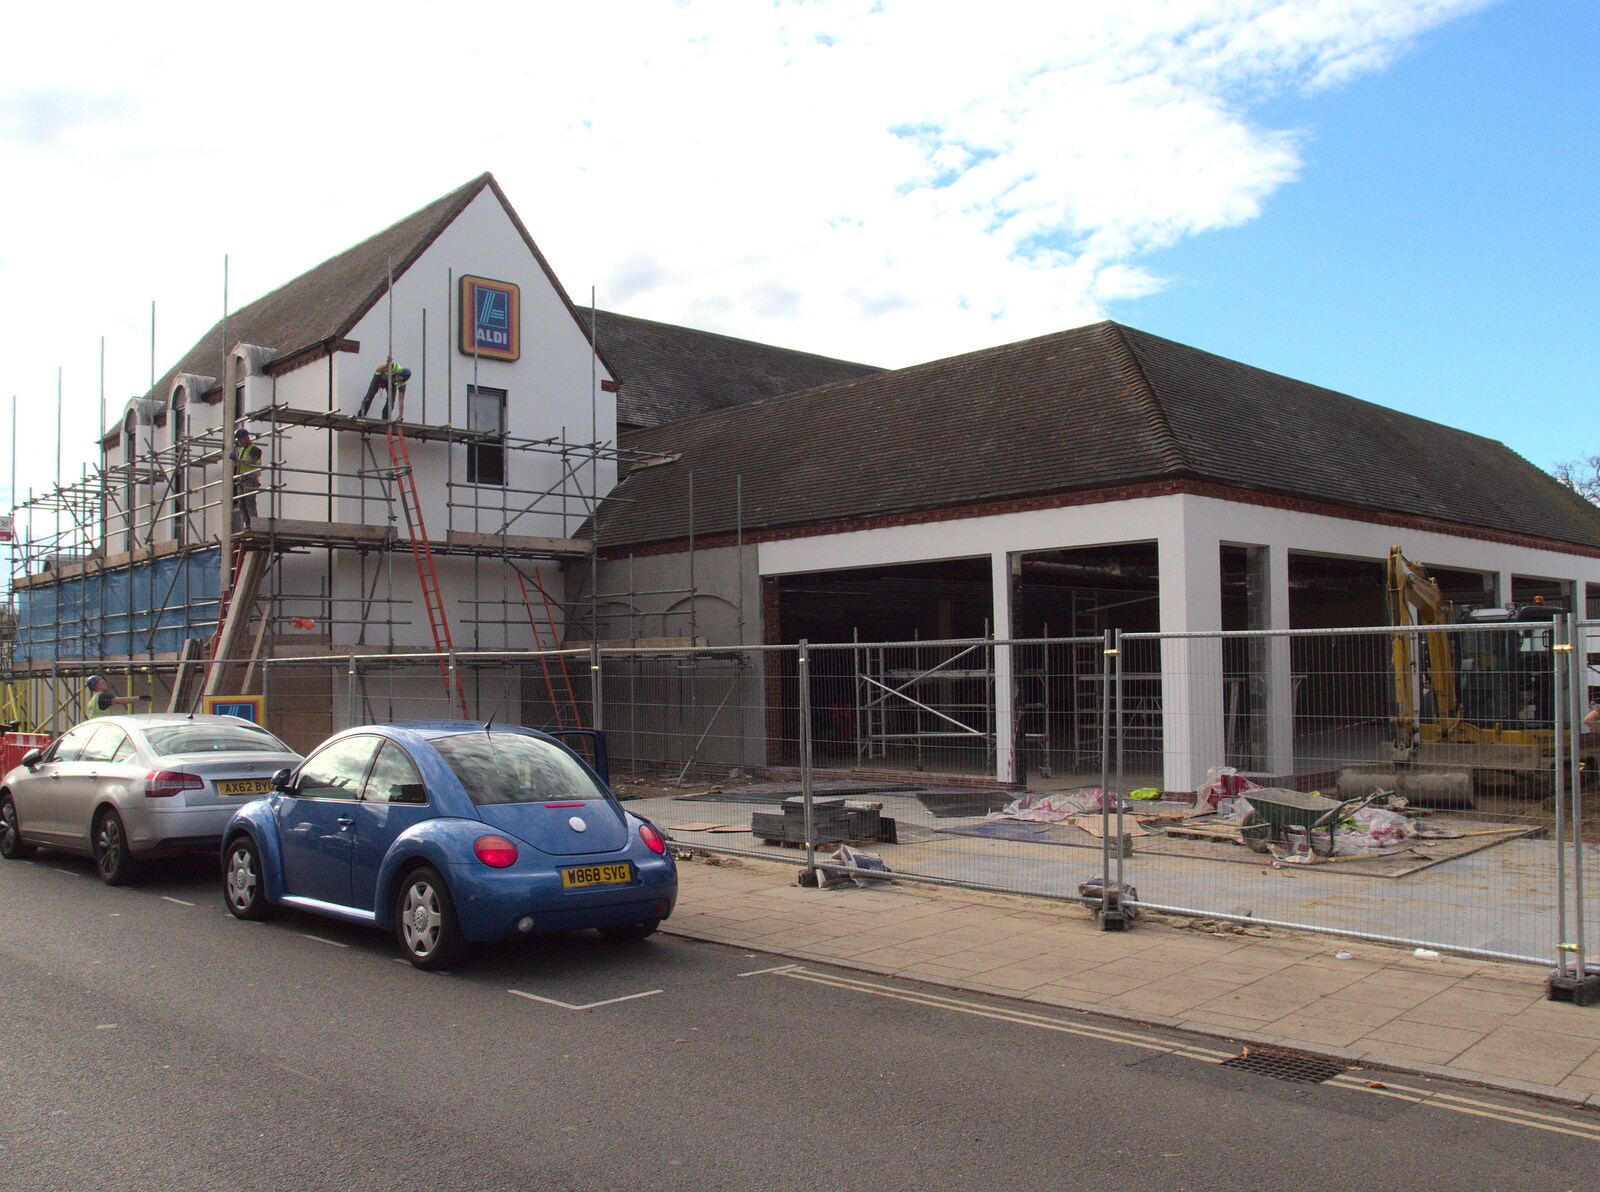 The new Aldi from A Bomb Scare and Fred Does Building, London and Suffolk - 30th October 2014